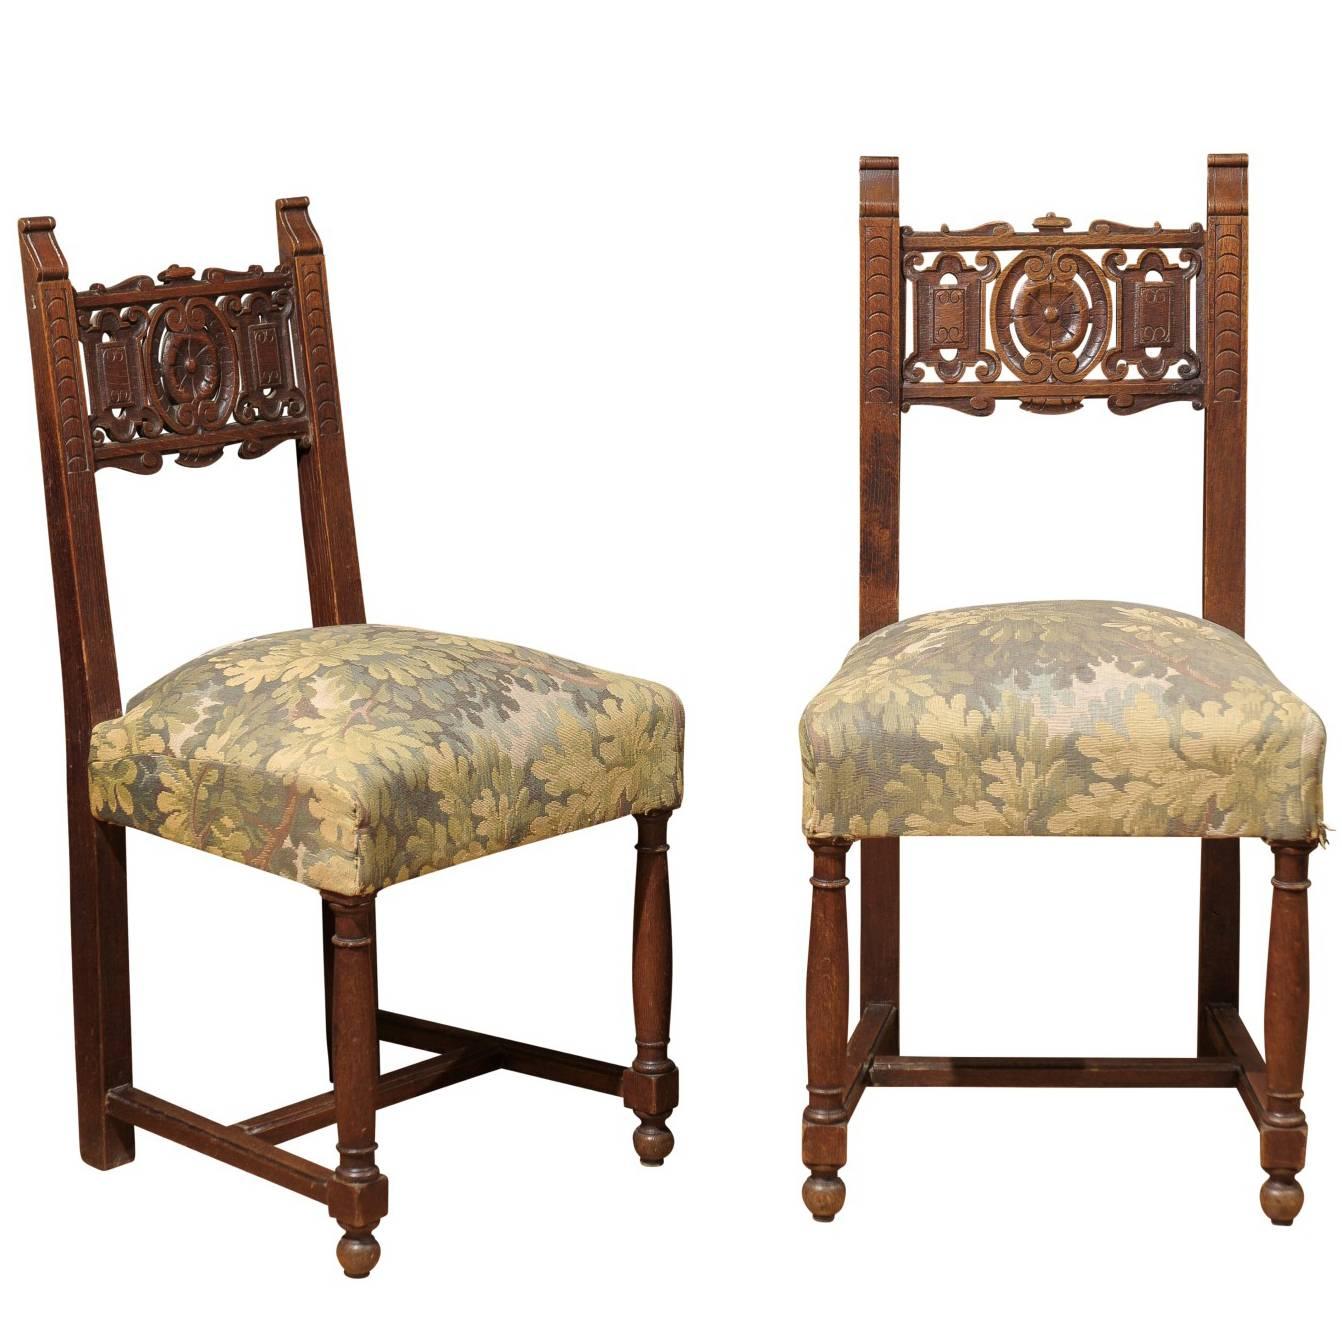 Pair of Upholstered Oak Chairs